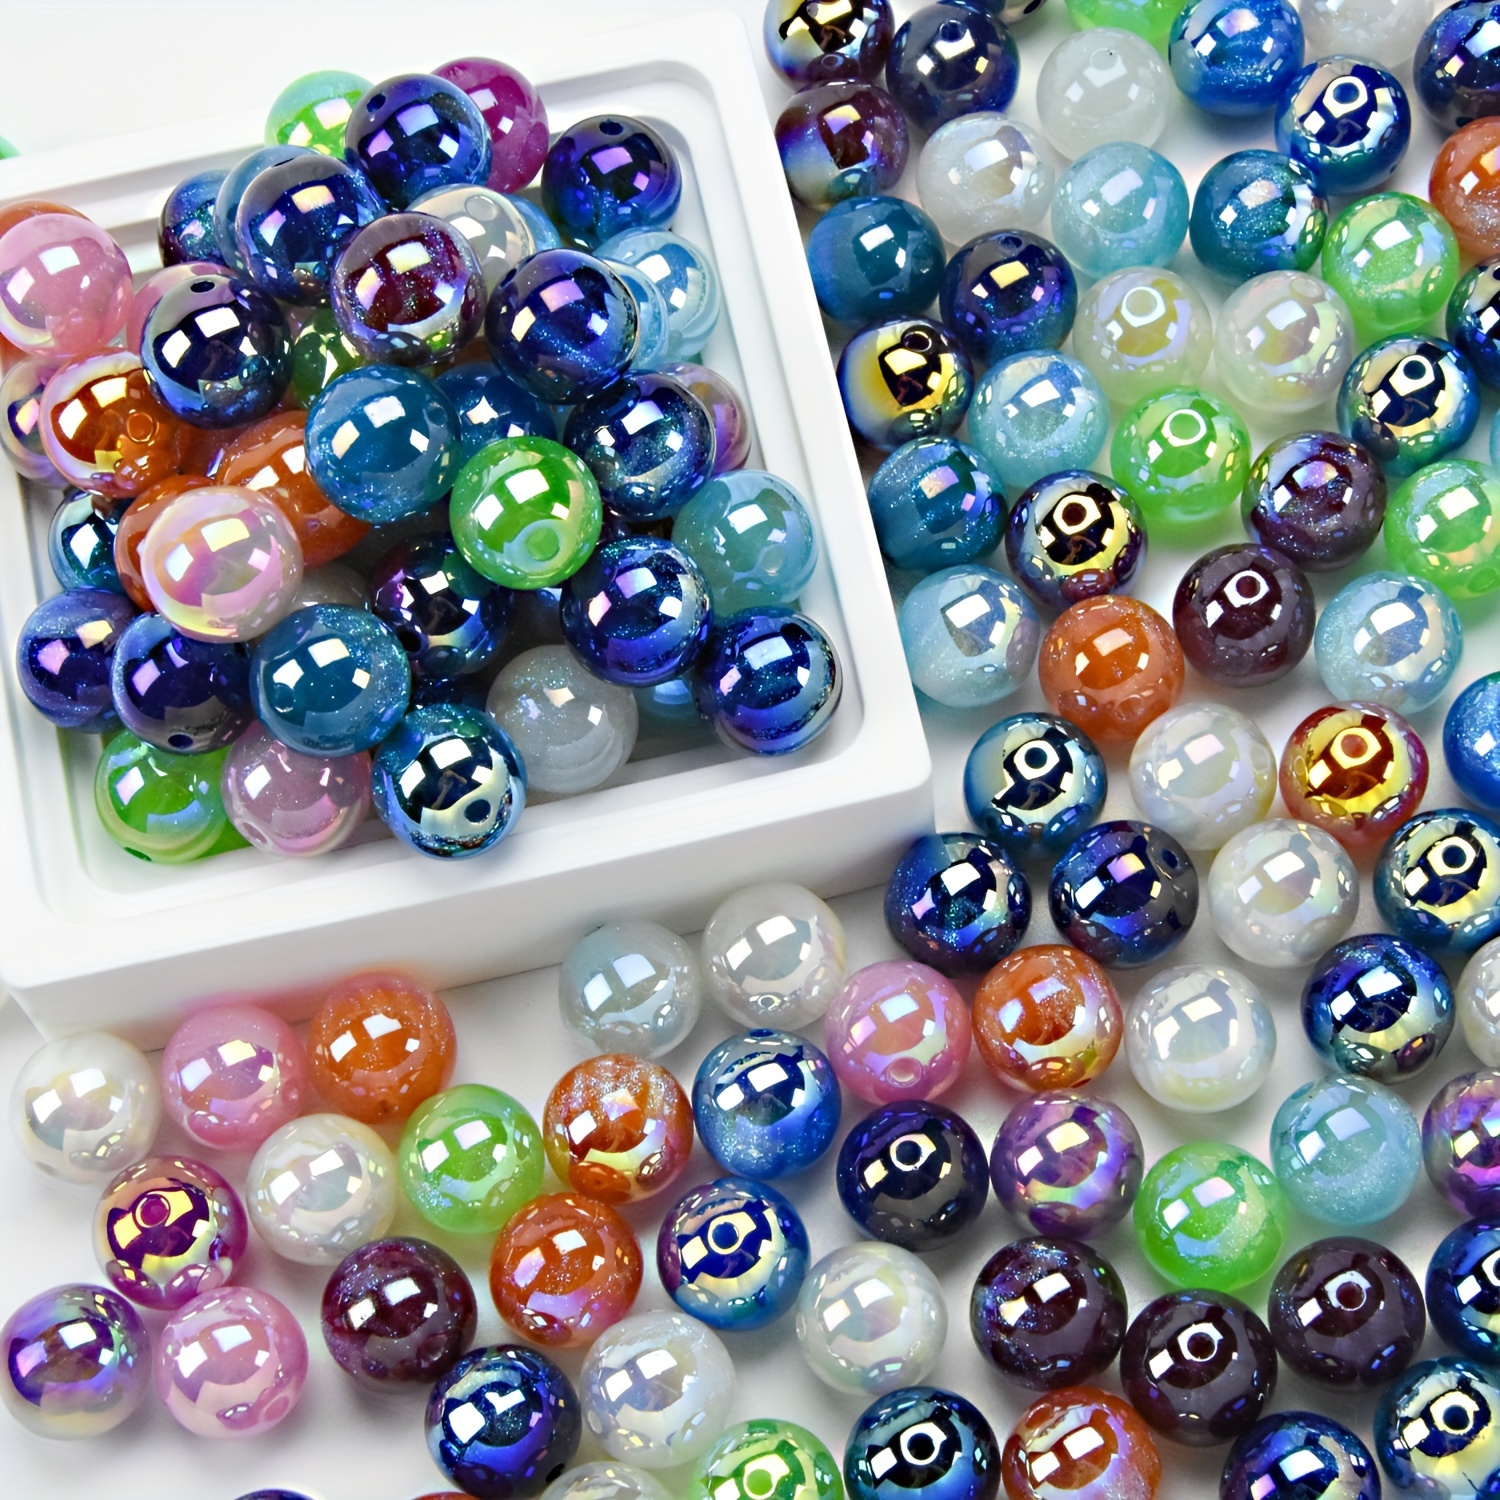 

20/40pcs 16mm Resin Round Beads, Uv Plated Inner Colorful Galaxy Shimmer Decorative Opaque Ornamental Beads For Diy Phone Chains, Friendship Bracelets, Pen Decors Crafts Accessories